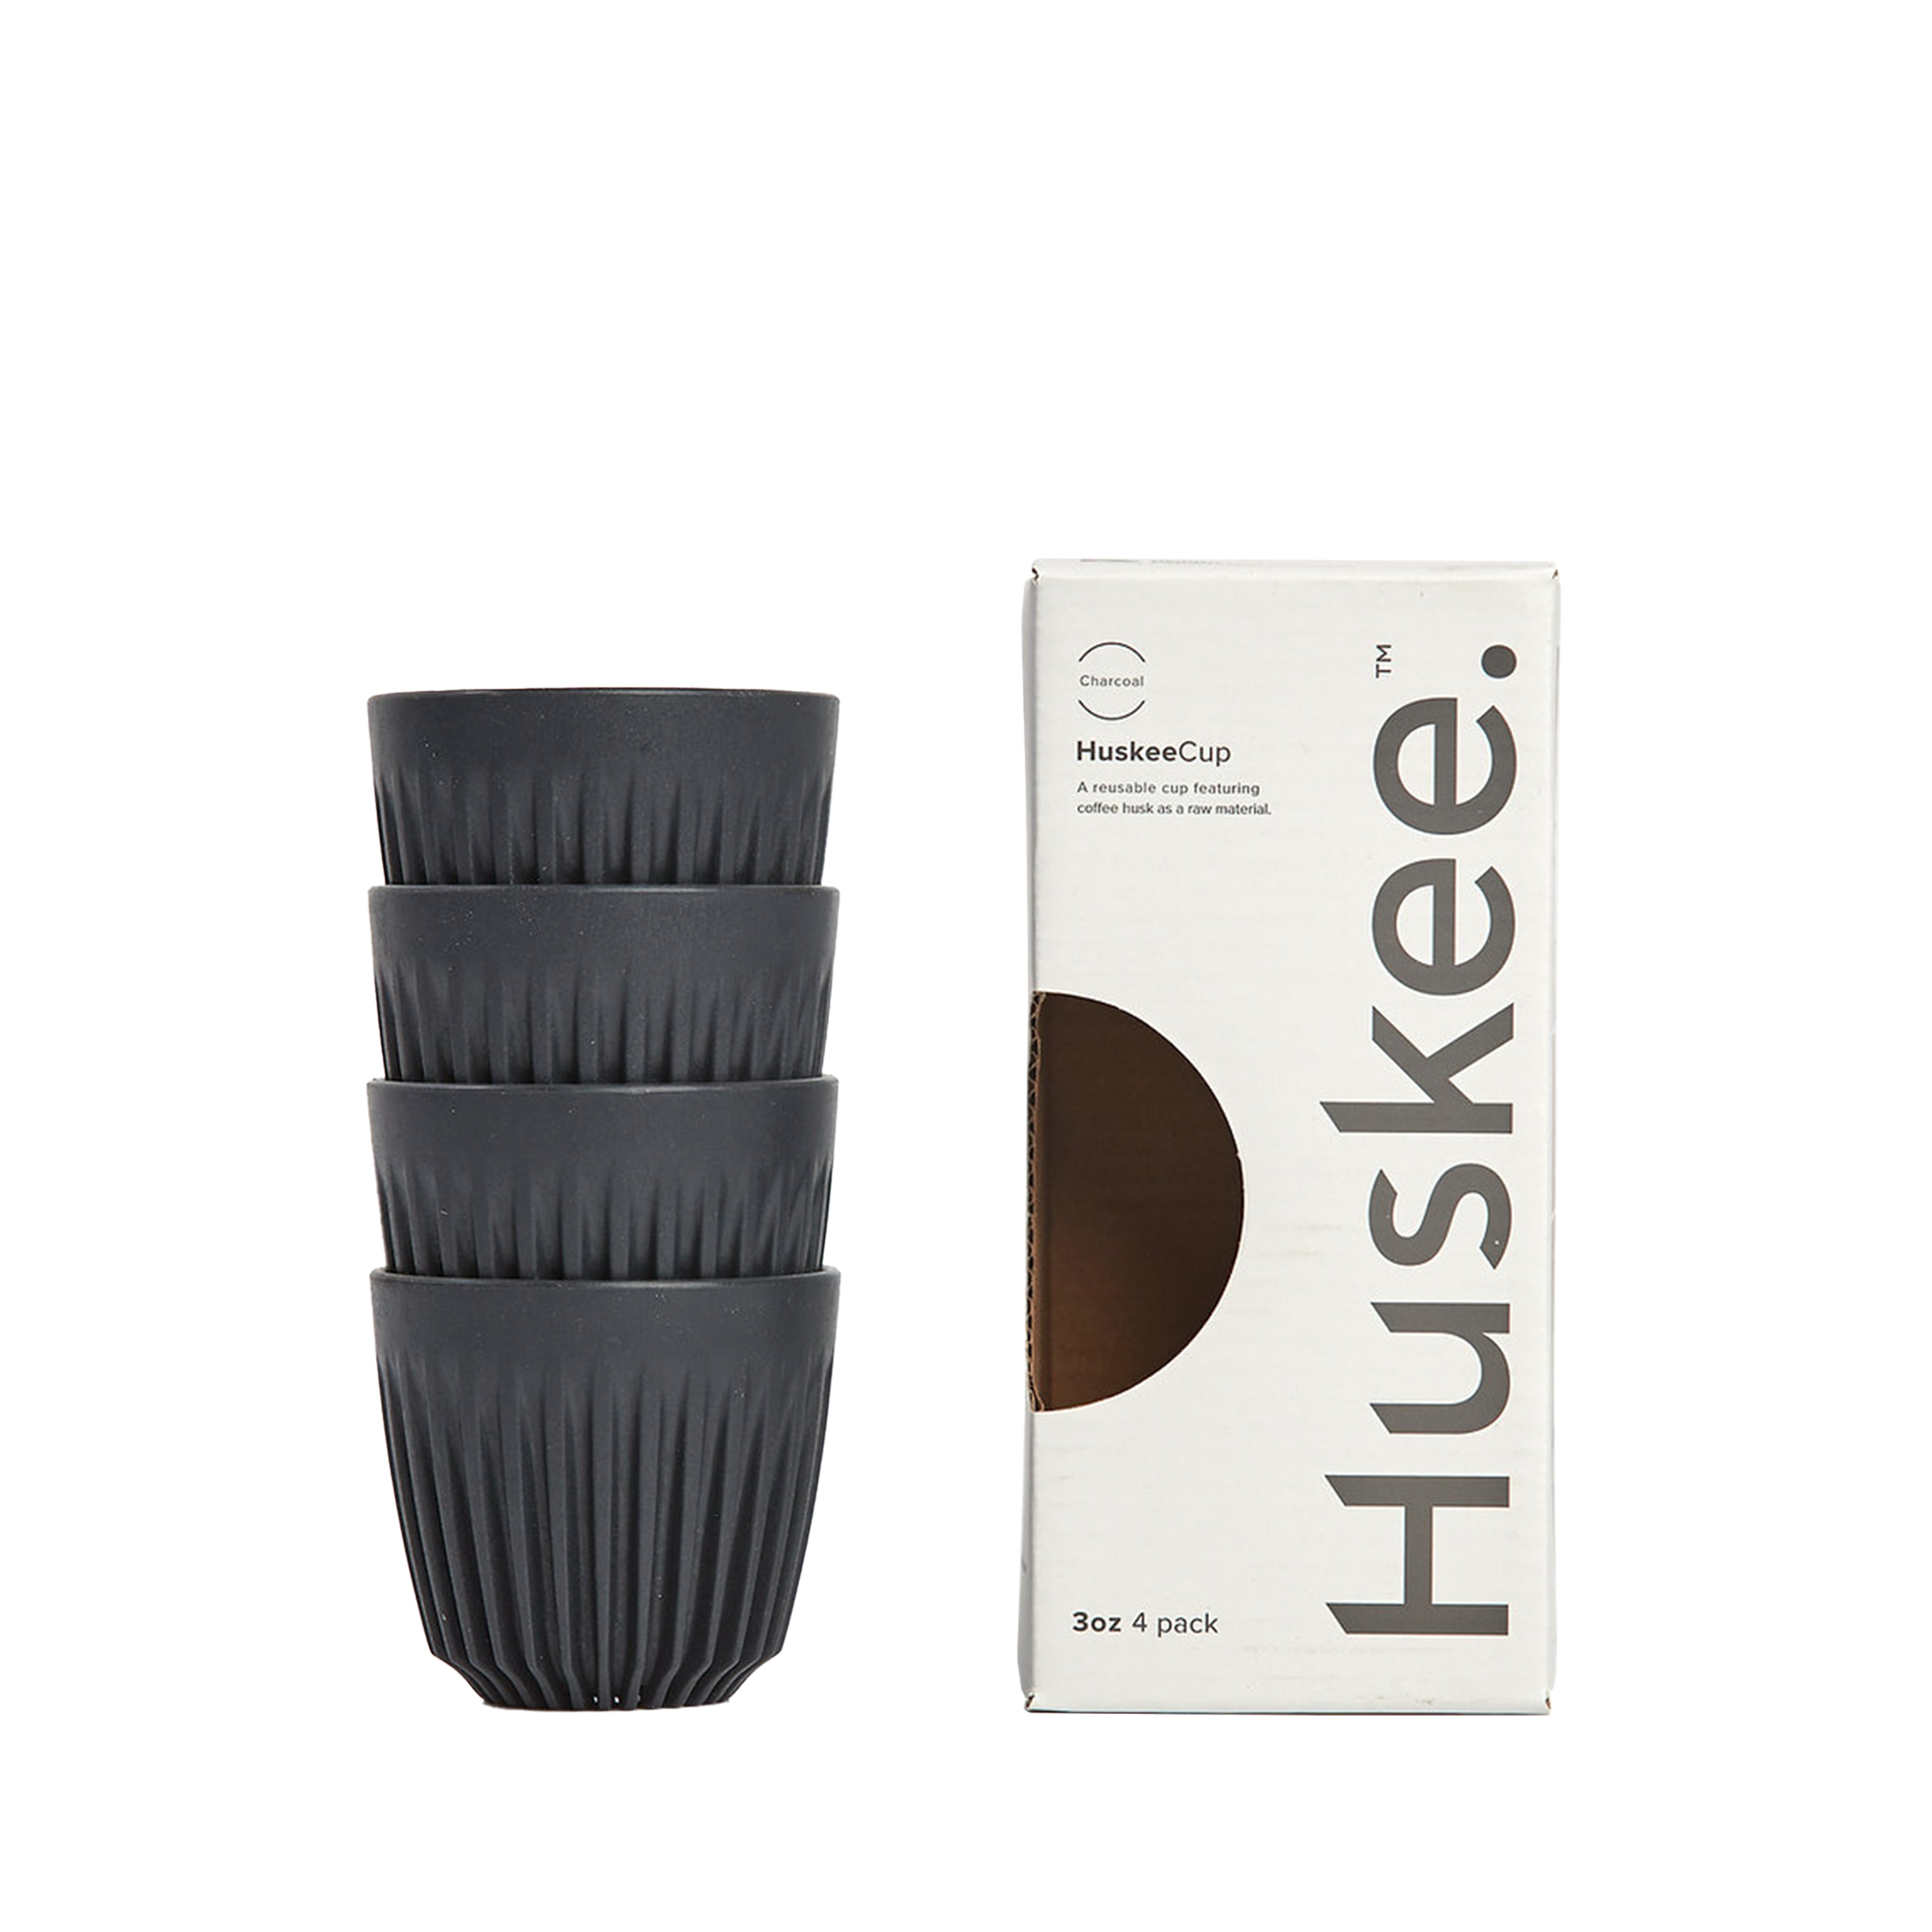 Huskee Espresso Cups | Reusable, 50% Recycled Material, 3oz, 4 Pack